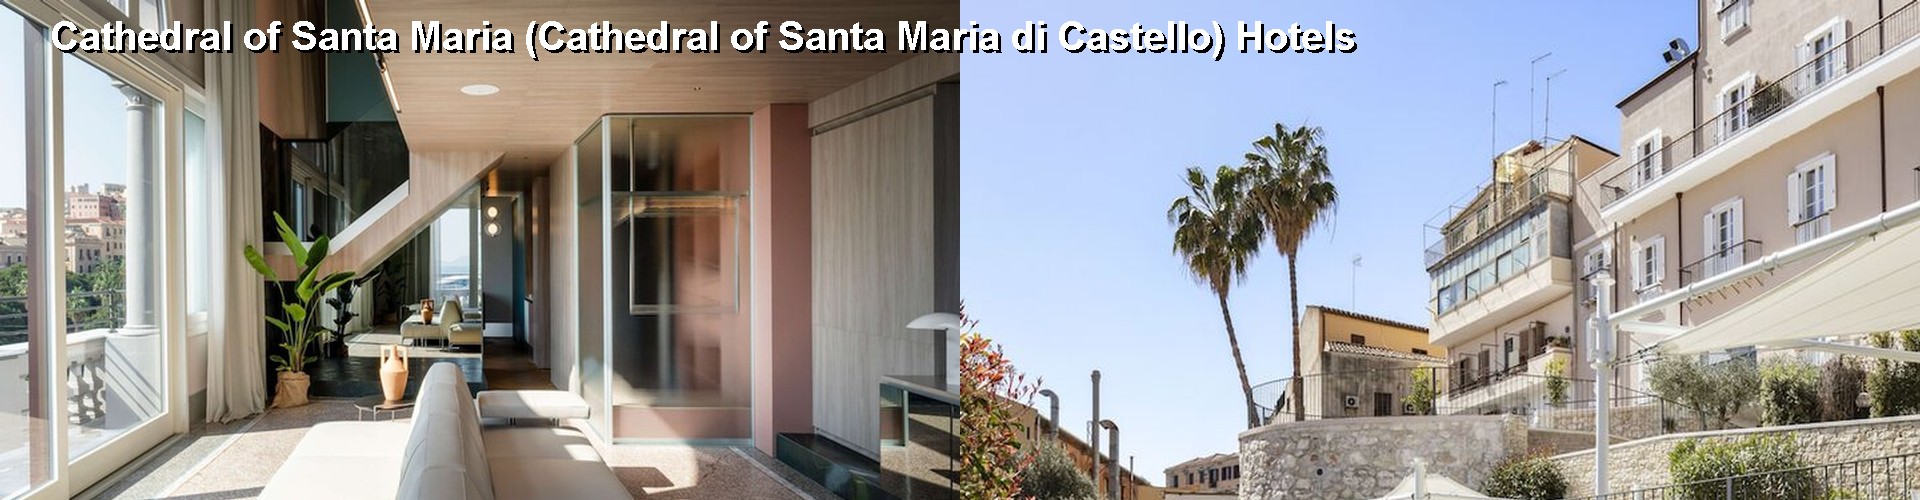 5 Best Hotels near Cathedral of Santa Maria (Cathedral of Santa Maria di Castello)